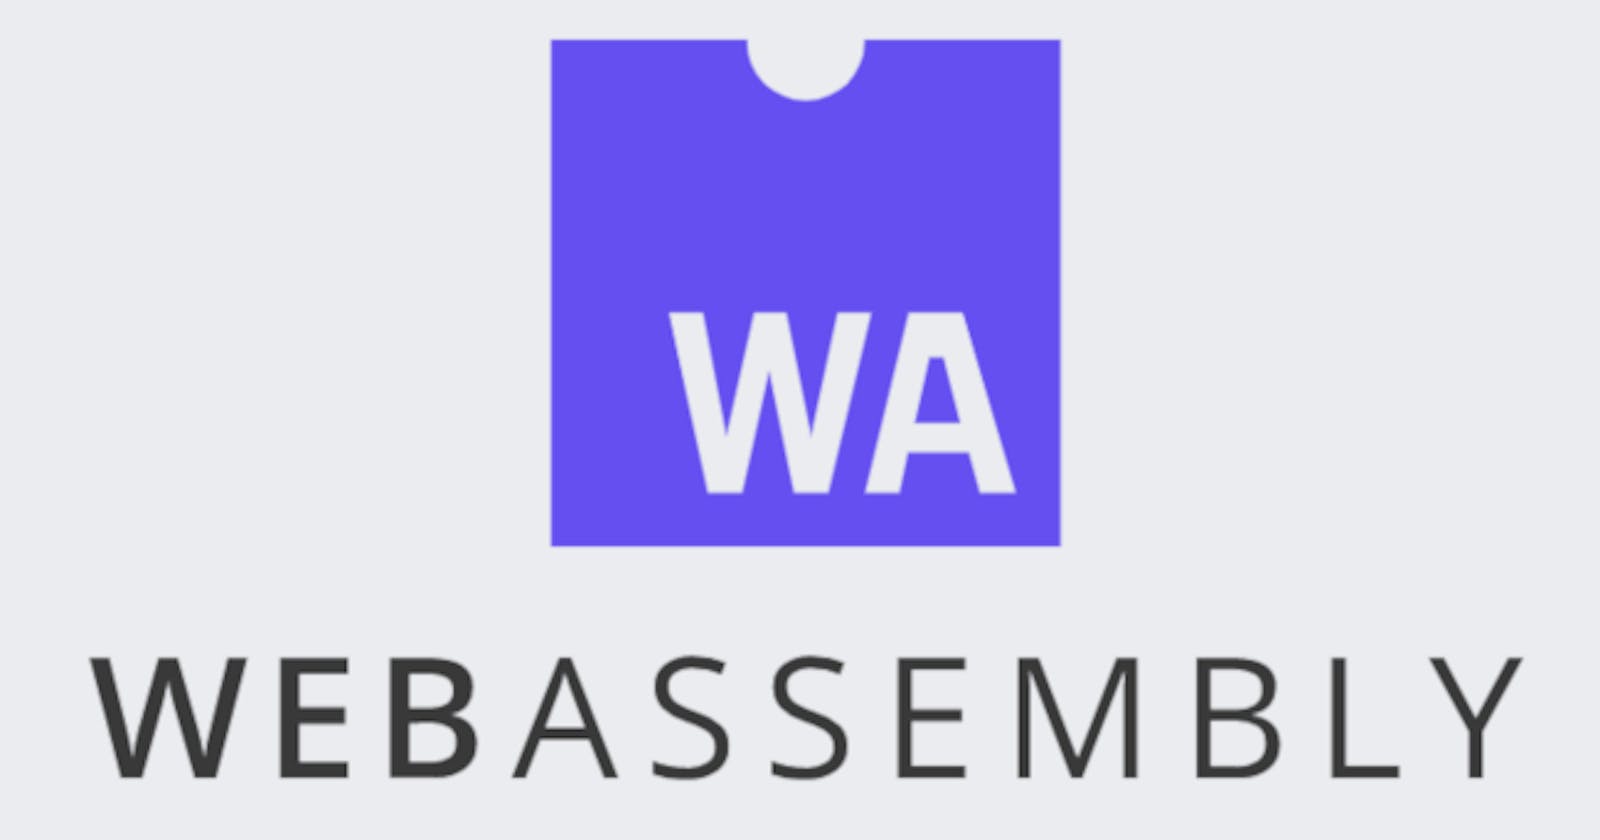 WebAssembly tools, frameworks, and libraries for .NET Developers